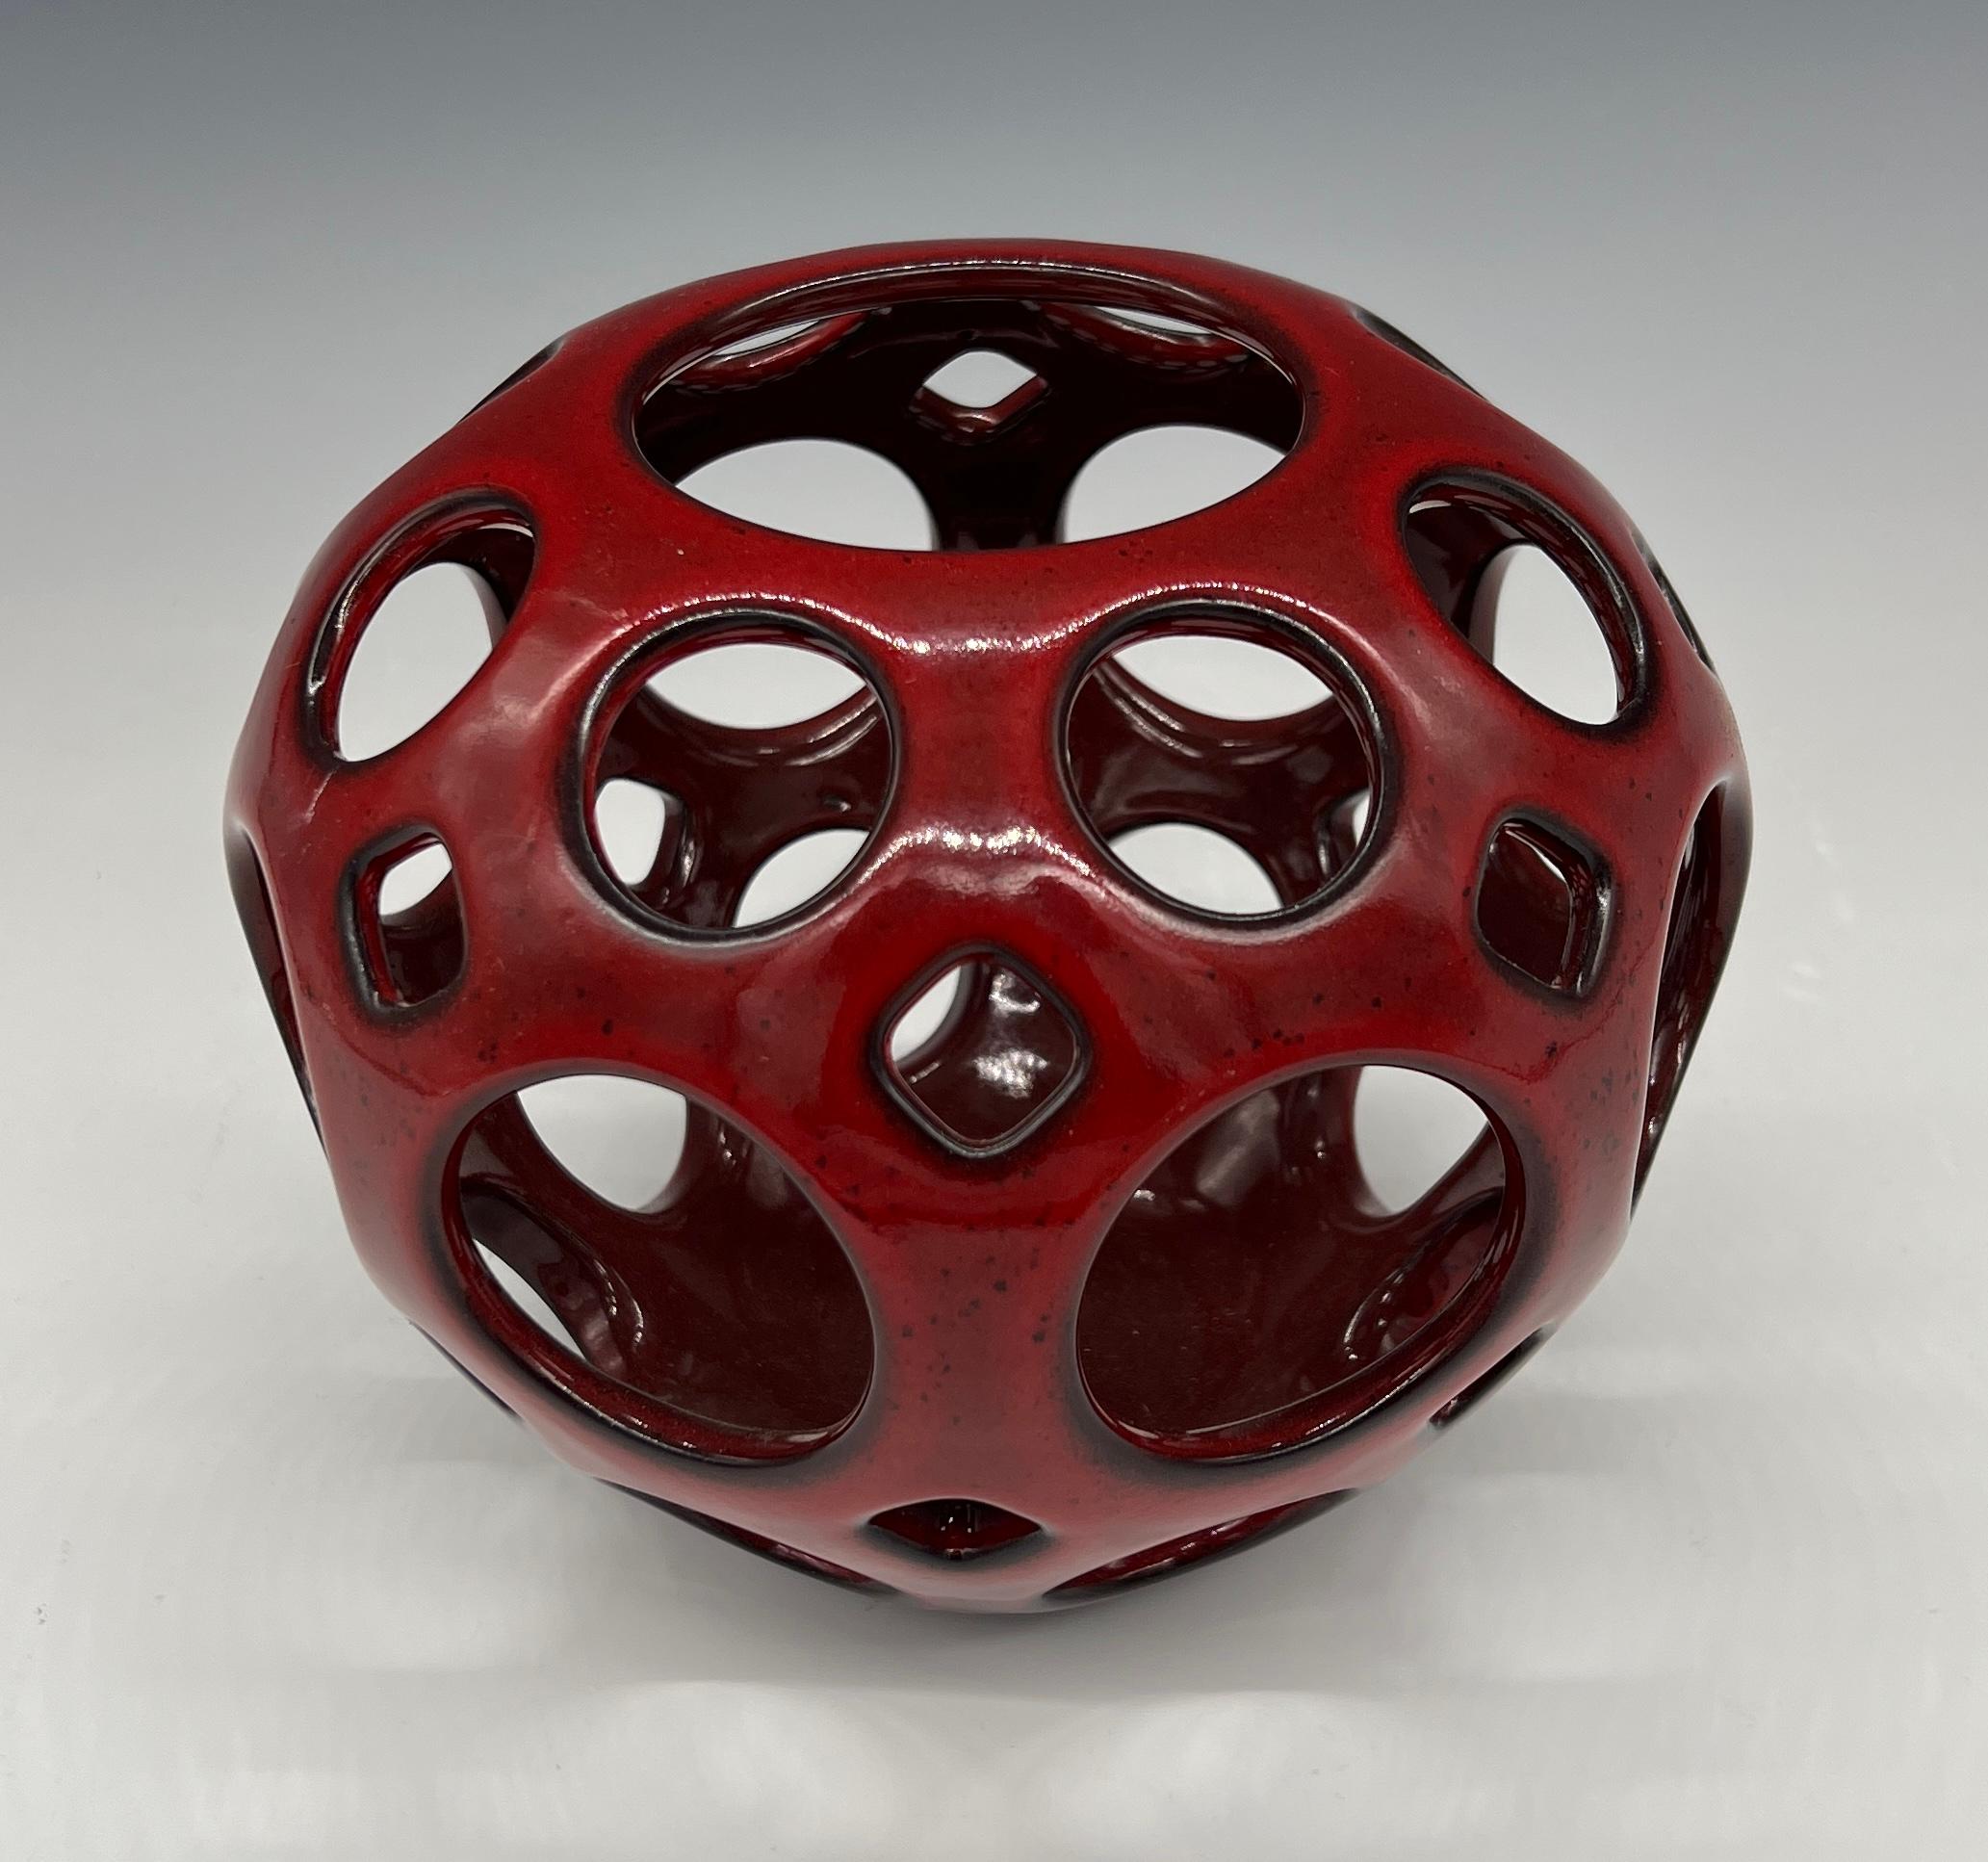 This wheel thrown, hand pierced ceramic tabletop sculpture/ vessel. with its vibrant red glaze that breaks to black, this piece provides the perfect pop of color to any room. It can stand alone as an art piece, or with a candle, it can illuminate a